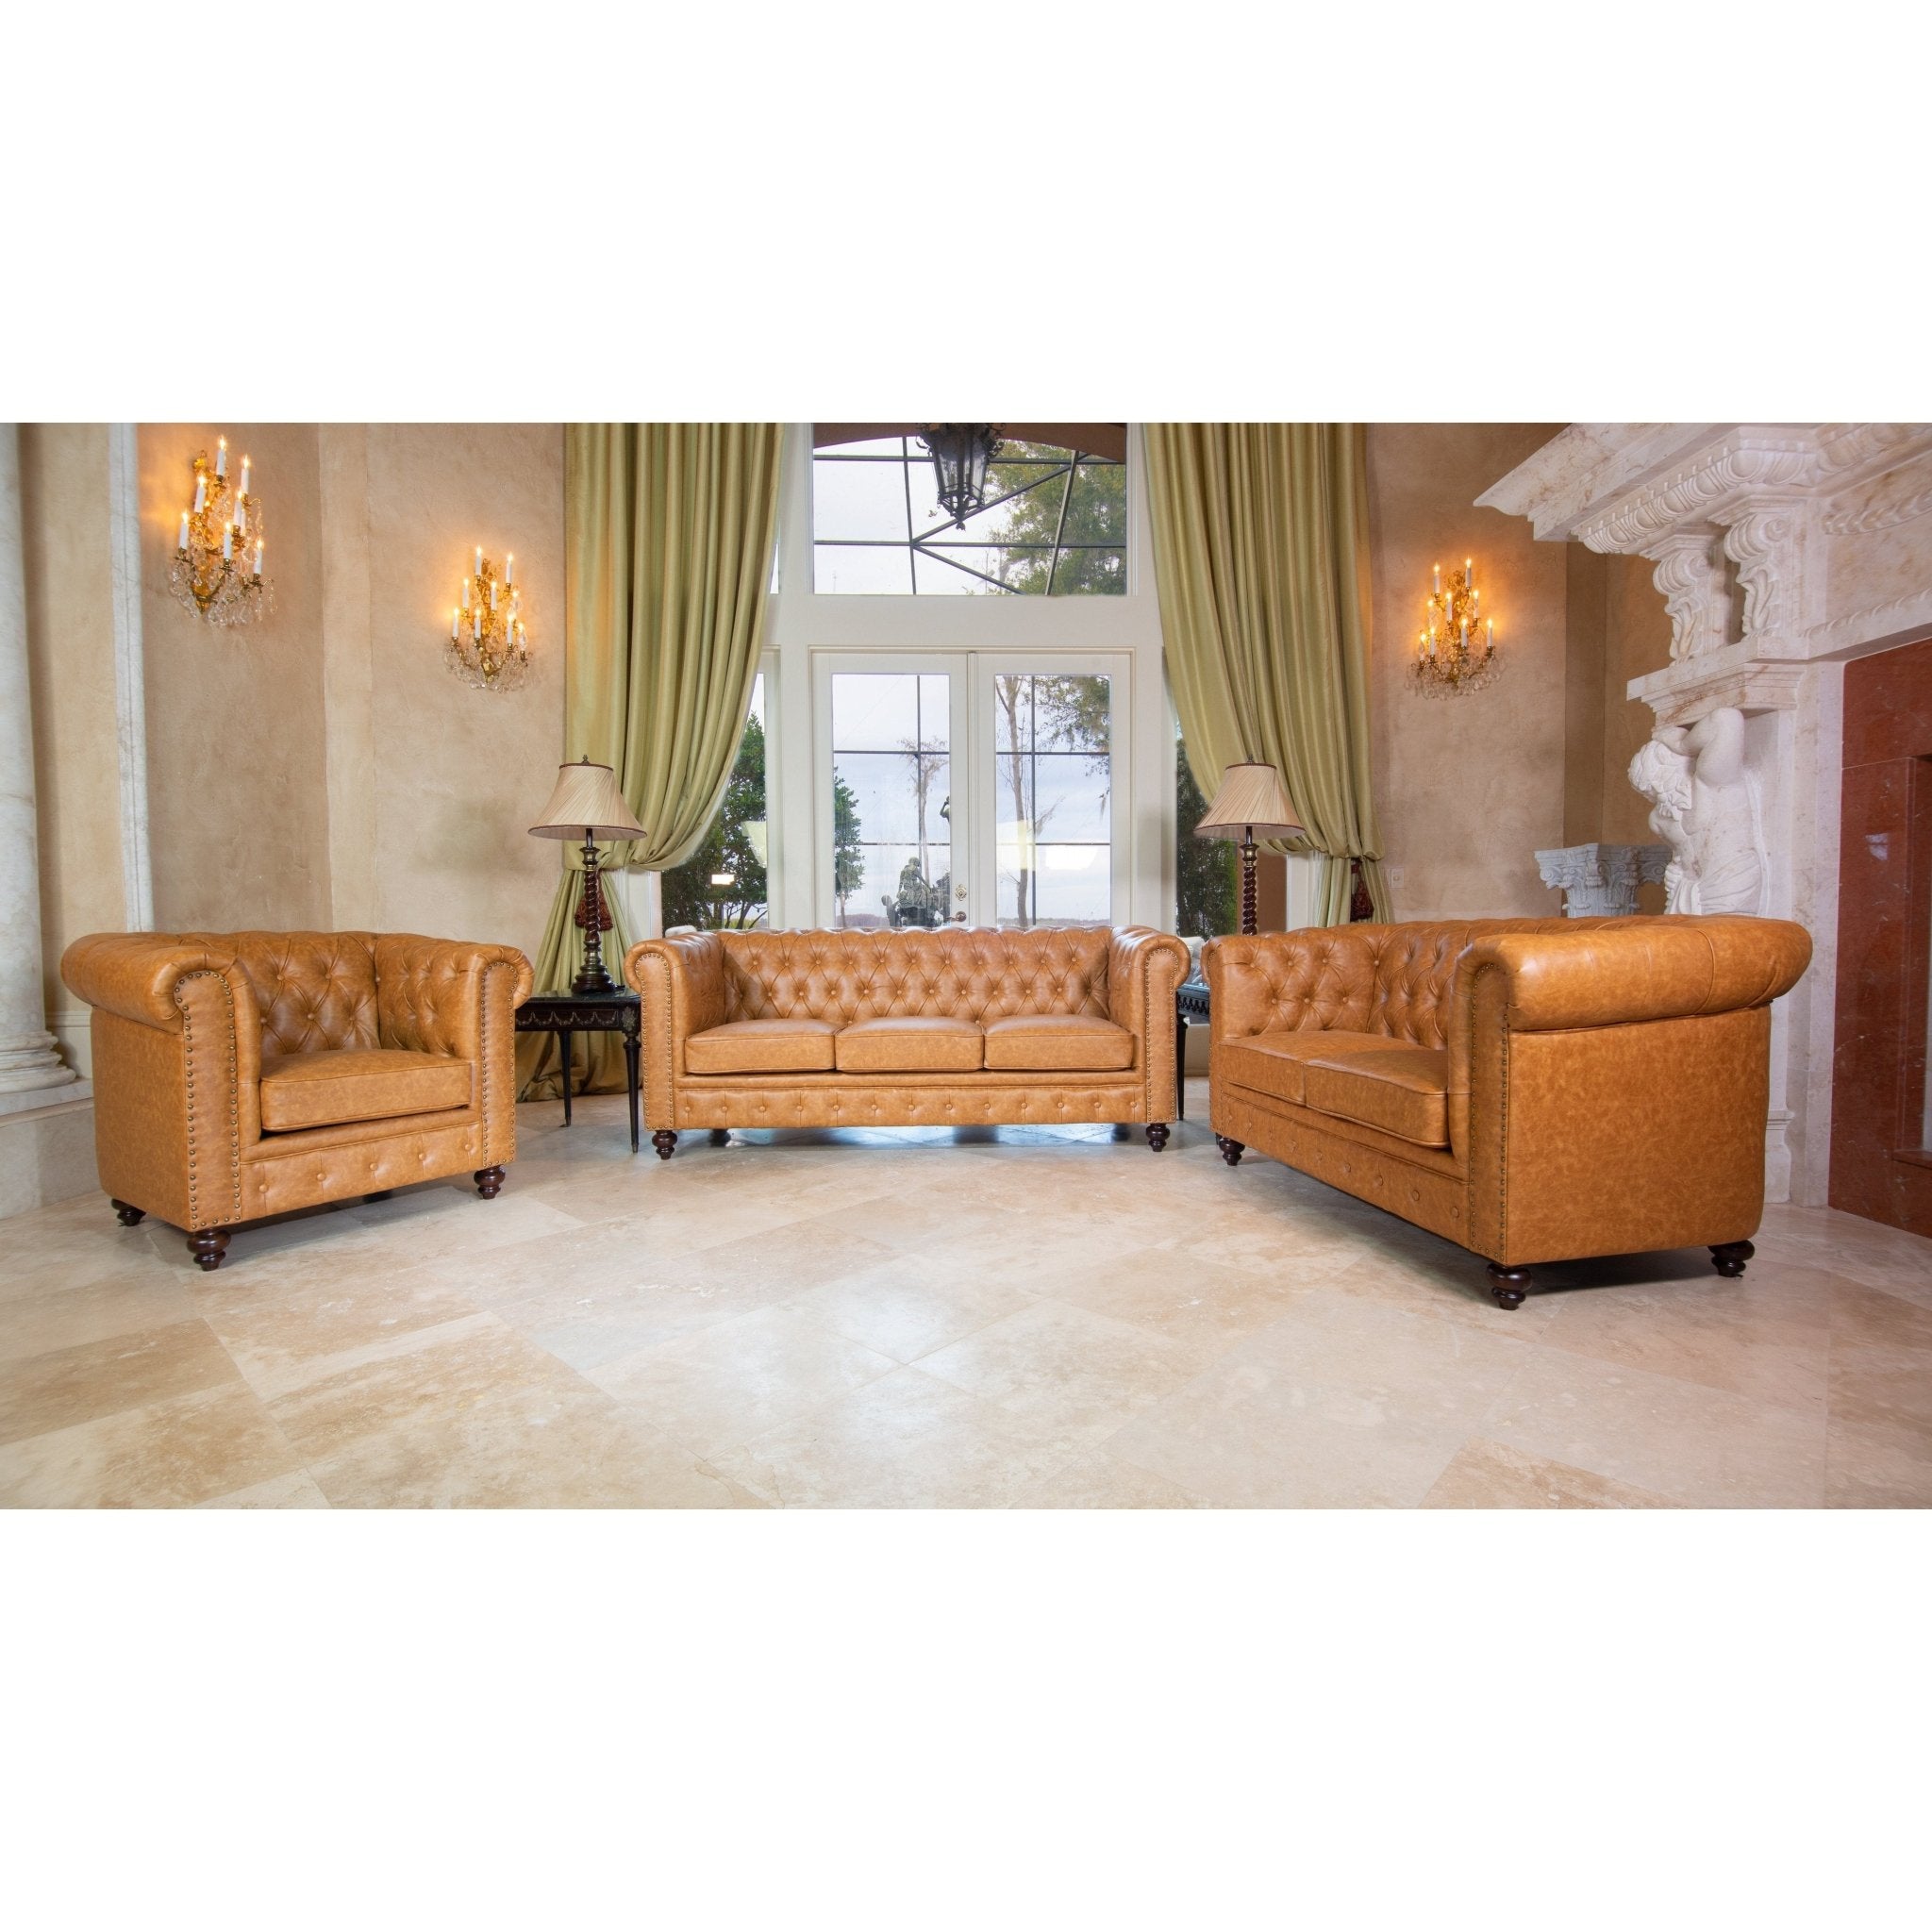 AFD Home Classic Chesterfield Tan Sofa Set of 3 - New Star Living